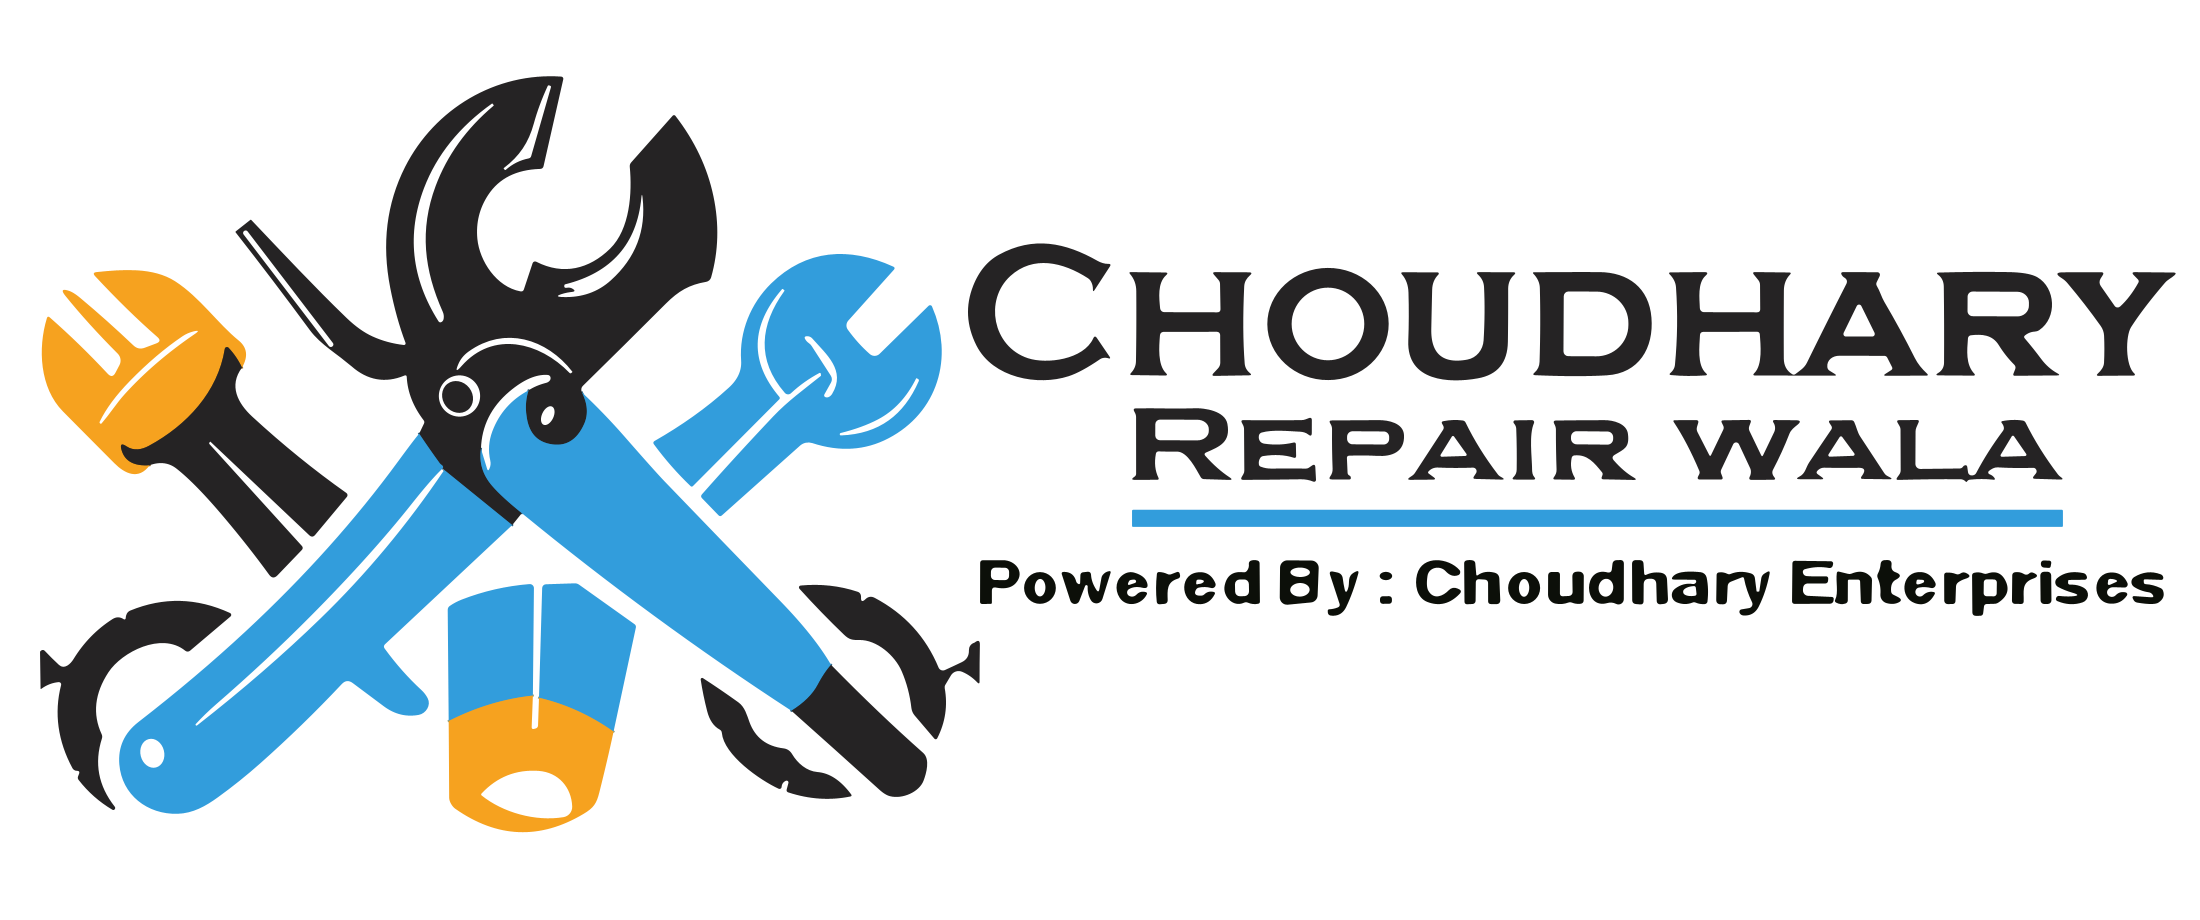 Choudhary Repair Wala – A Complete Home Care Solution